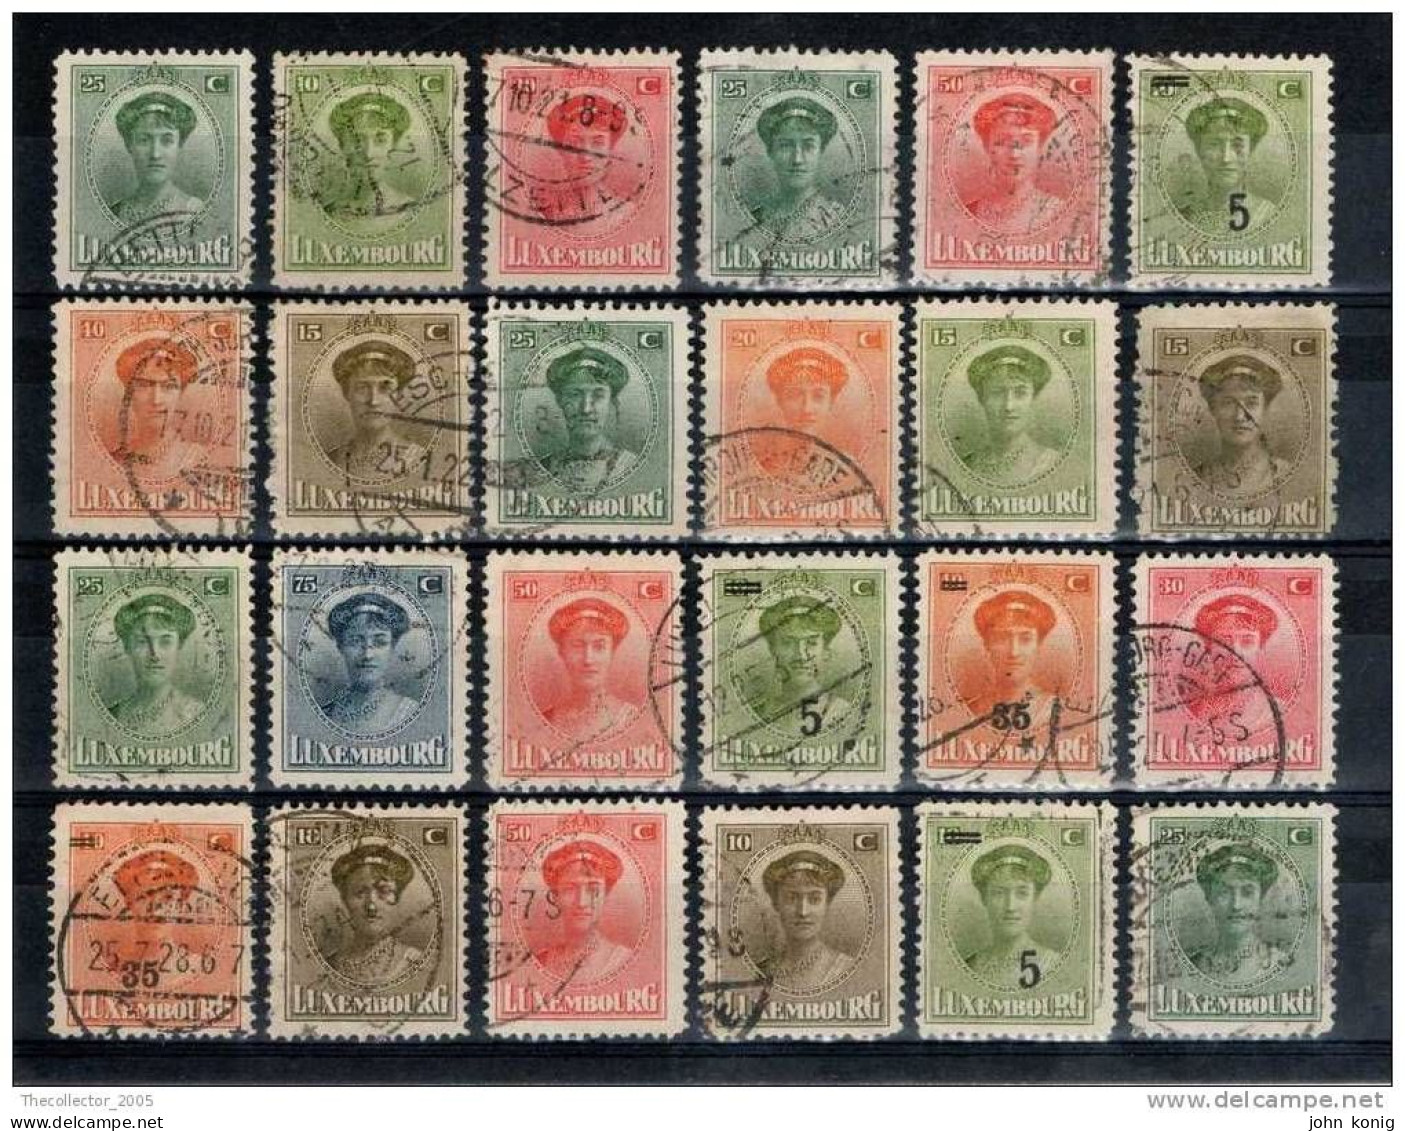 Luxembourg - Lussemburgo - Stamps Lot - Timbres Beaucoup - Menge Briefmarken - Sellos Mucho - Colecciones